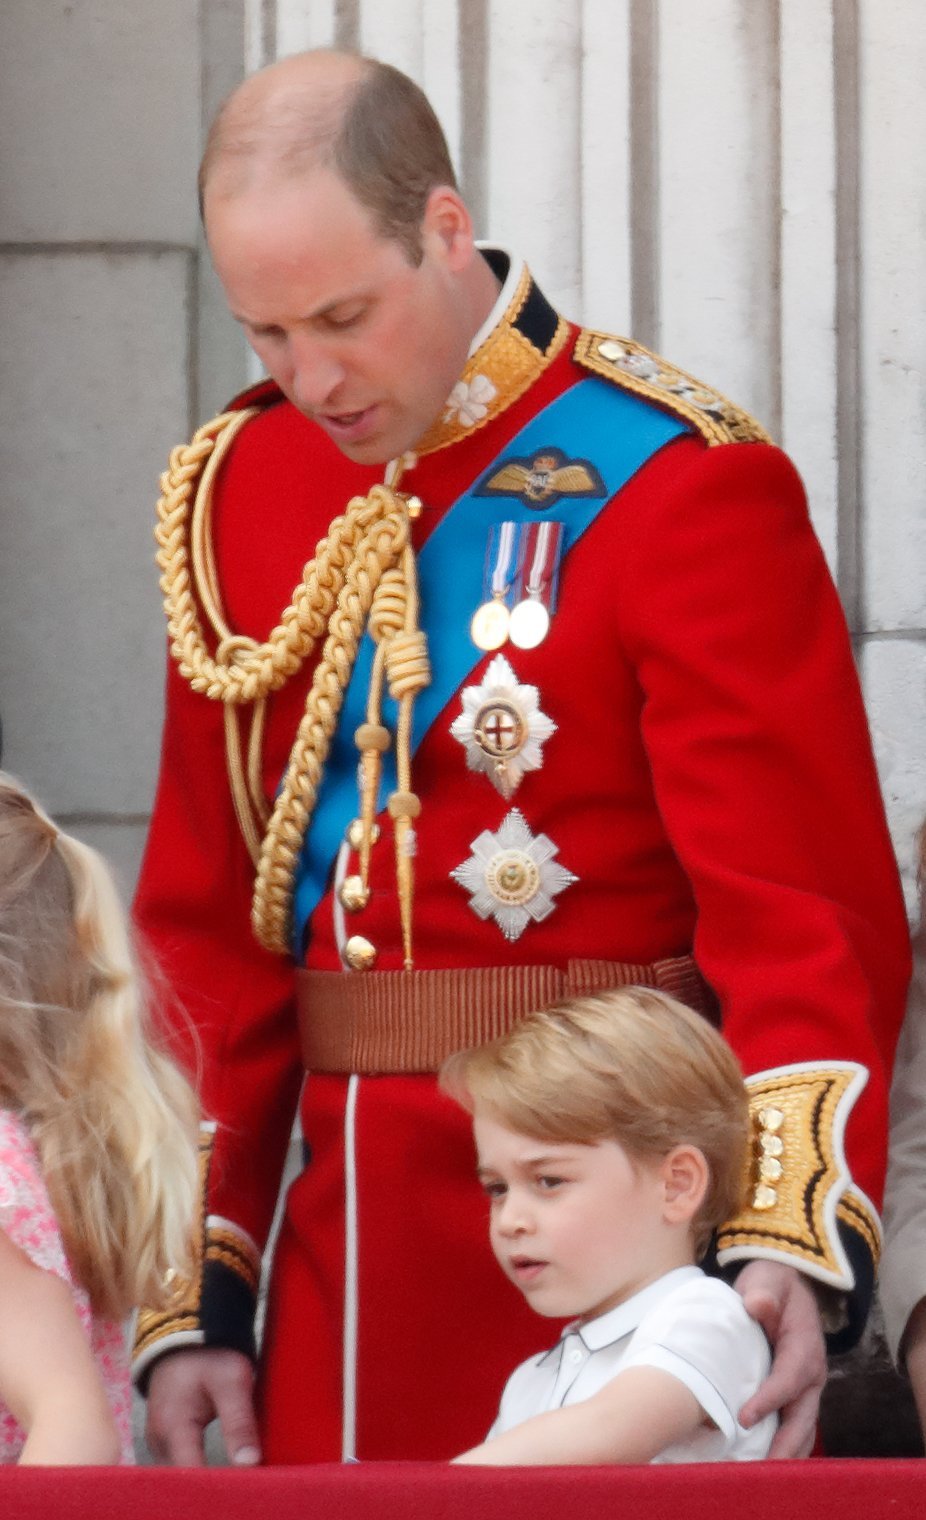 Prince William and Prince George of Cambridge at the 2018 Trooping The Color | Photo: Getty Images